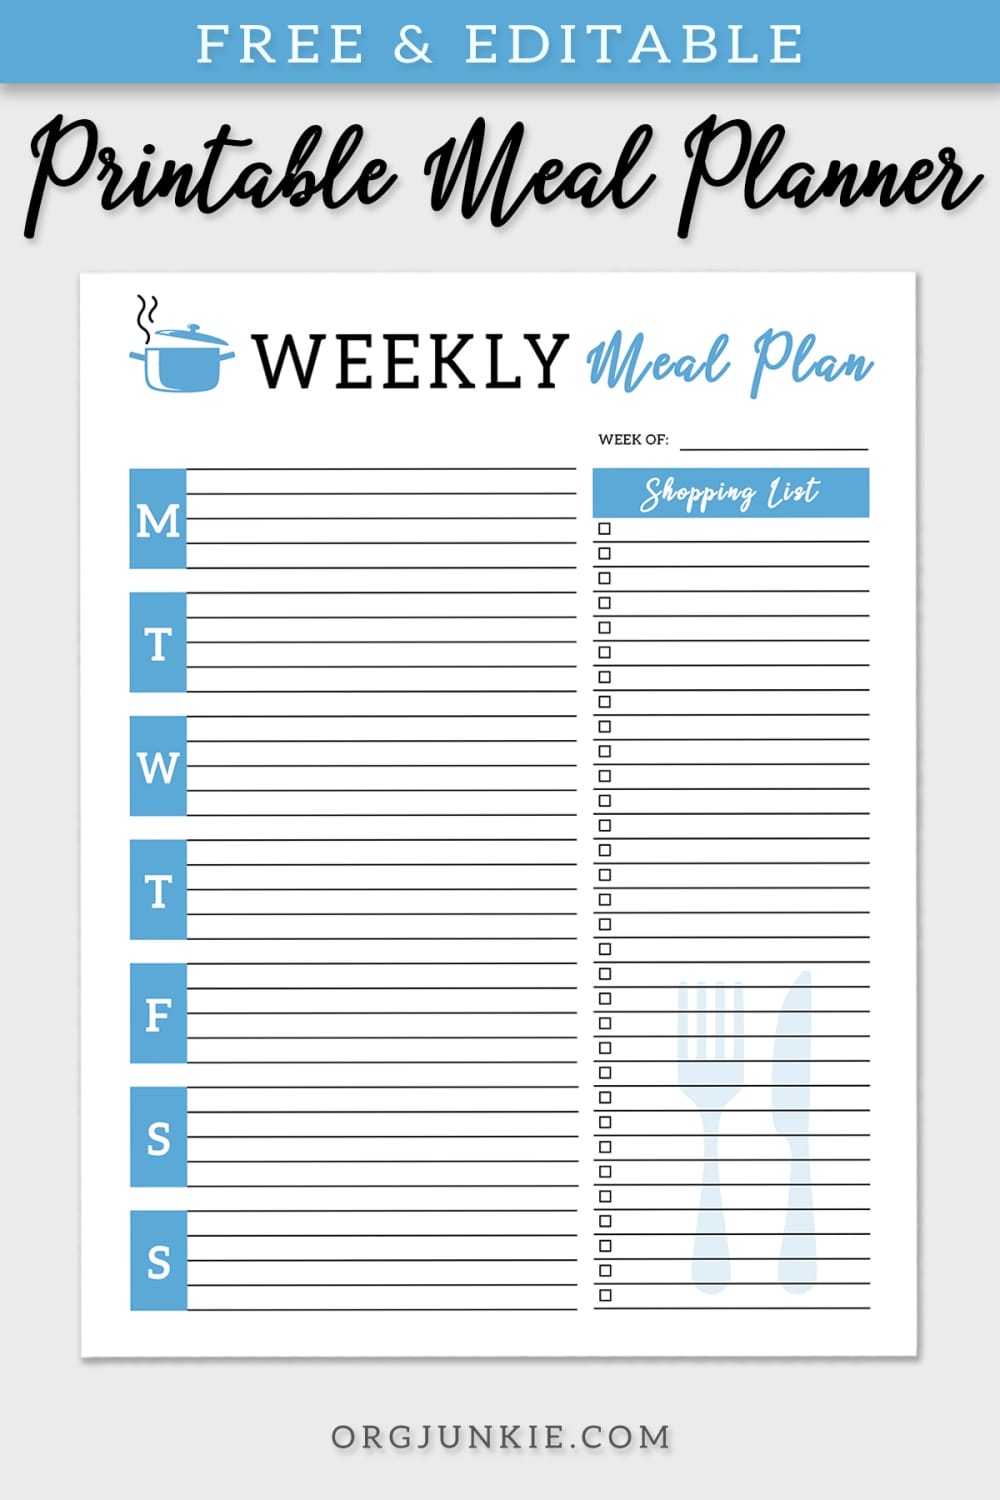 FREE Editable Weekly Menu Planners & Shopping List Templates at I'm an Organizing Junkie blog